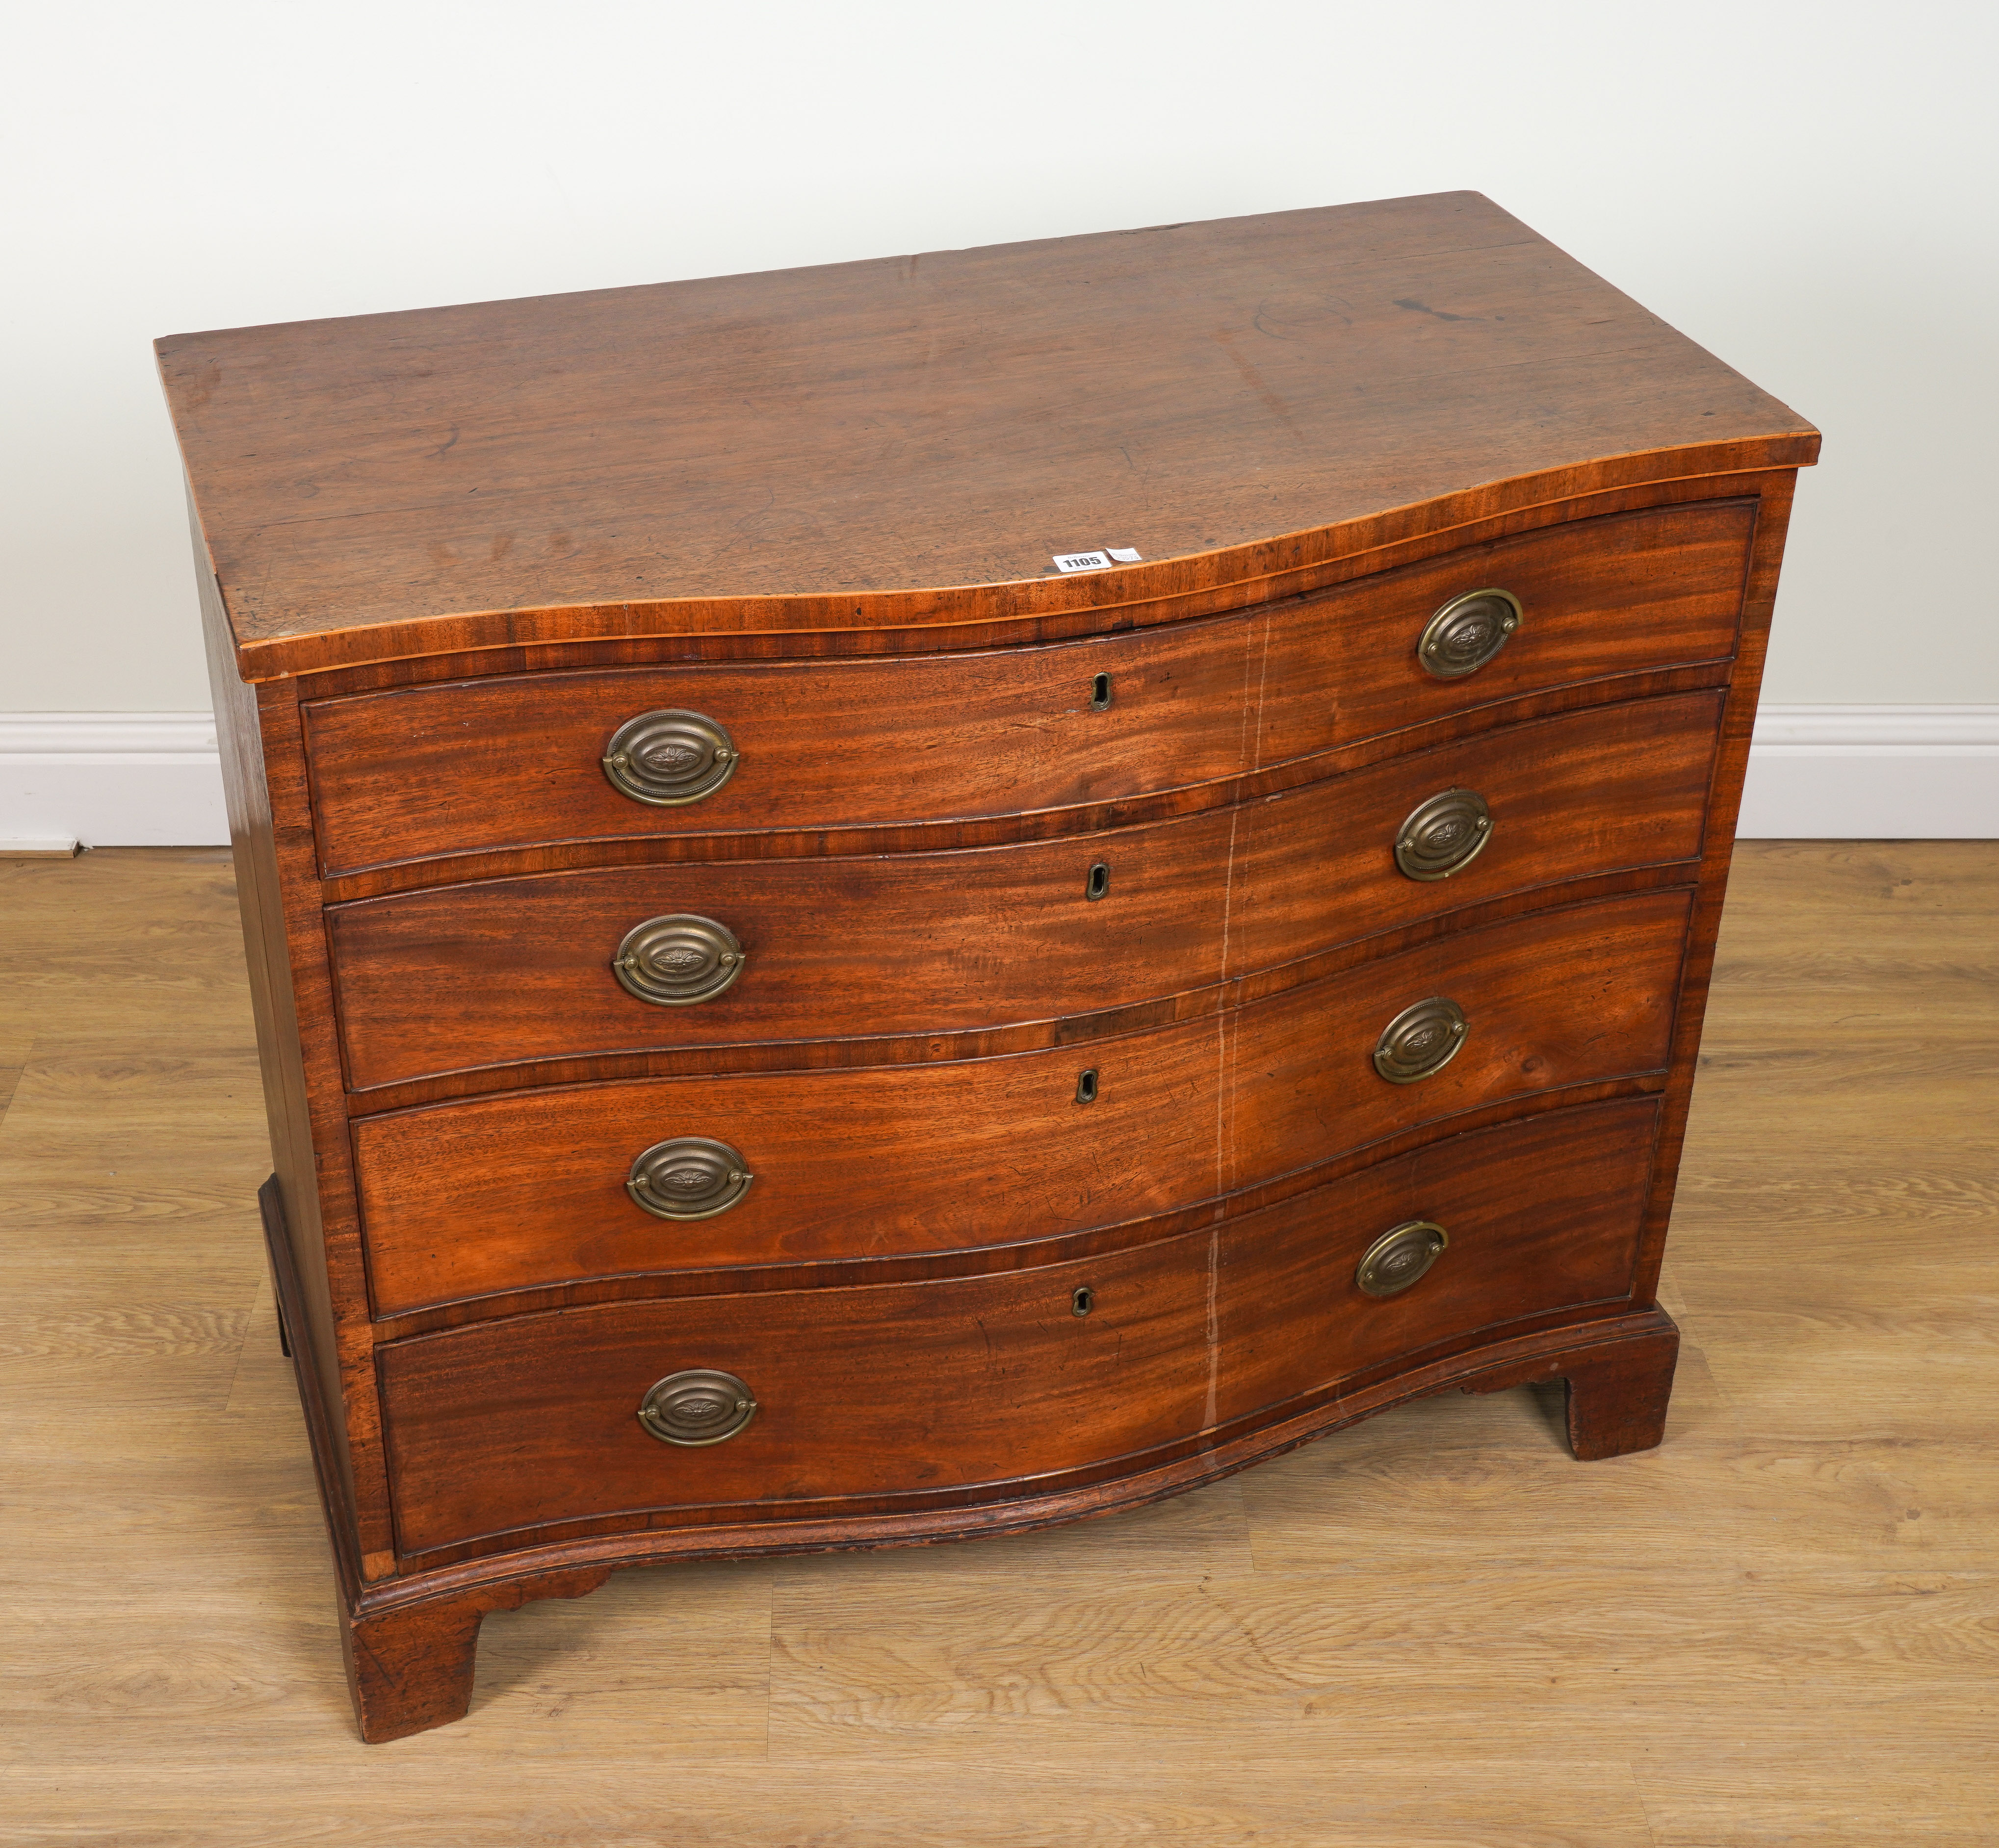 A GEORGE III INLAID MAHOGANY SERPENTINE CHEST OF FOUR LONG GRADUATED DRAWERS - Image 4 of 6